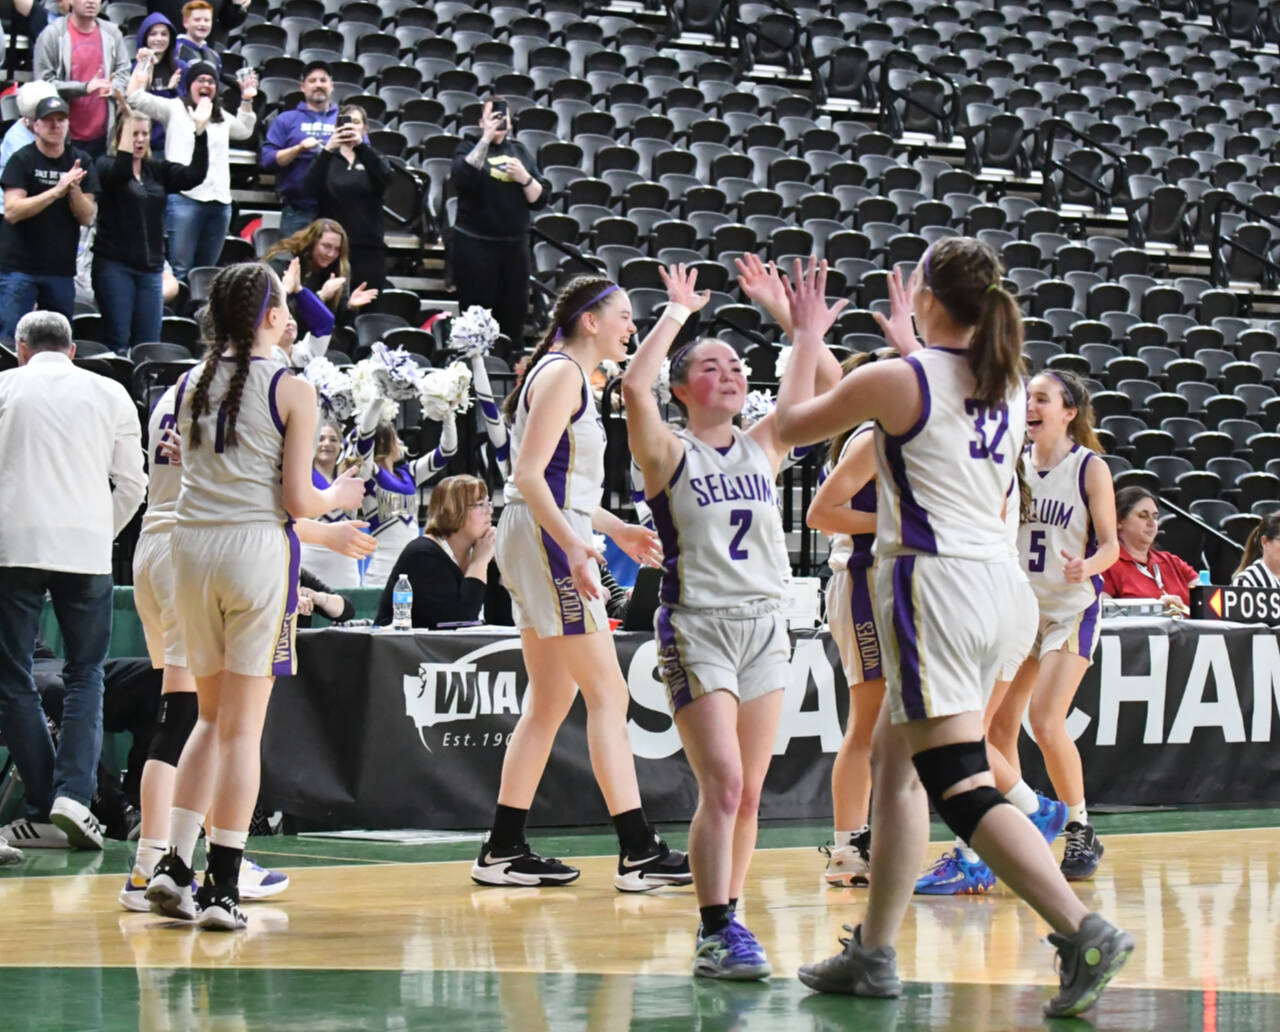 Photo by Jim Heintz / Sequim’s Hannah Bates (2) and Hailey Wagner (32) celebrate the Wolves’ Round of 12 victory at the class 2A state tournament in Yakima on March 1.